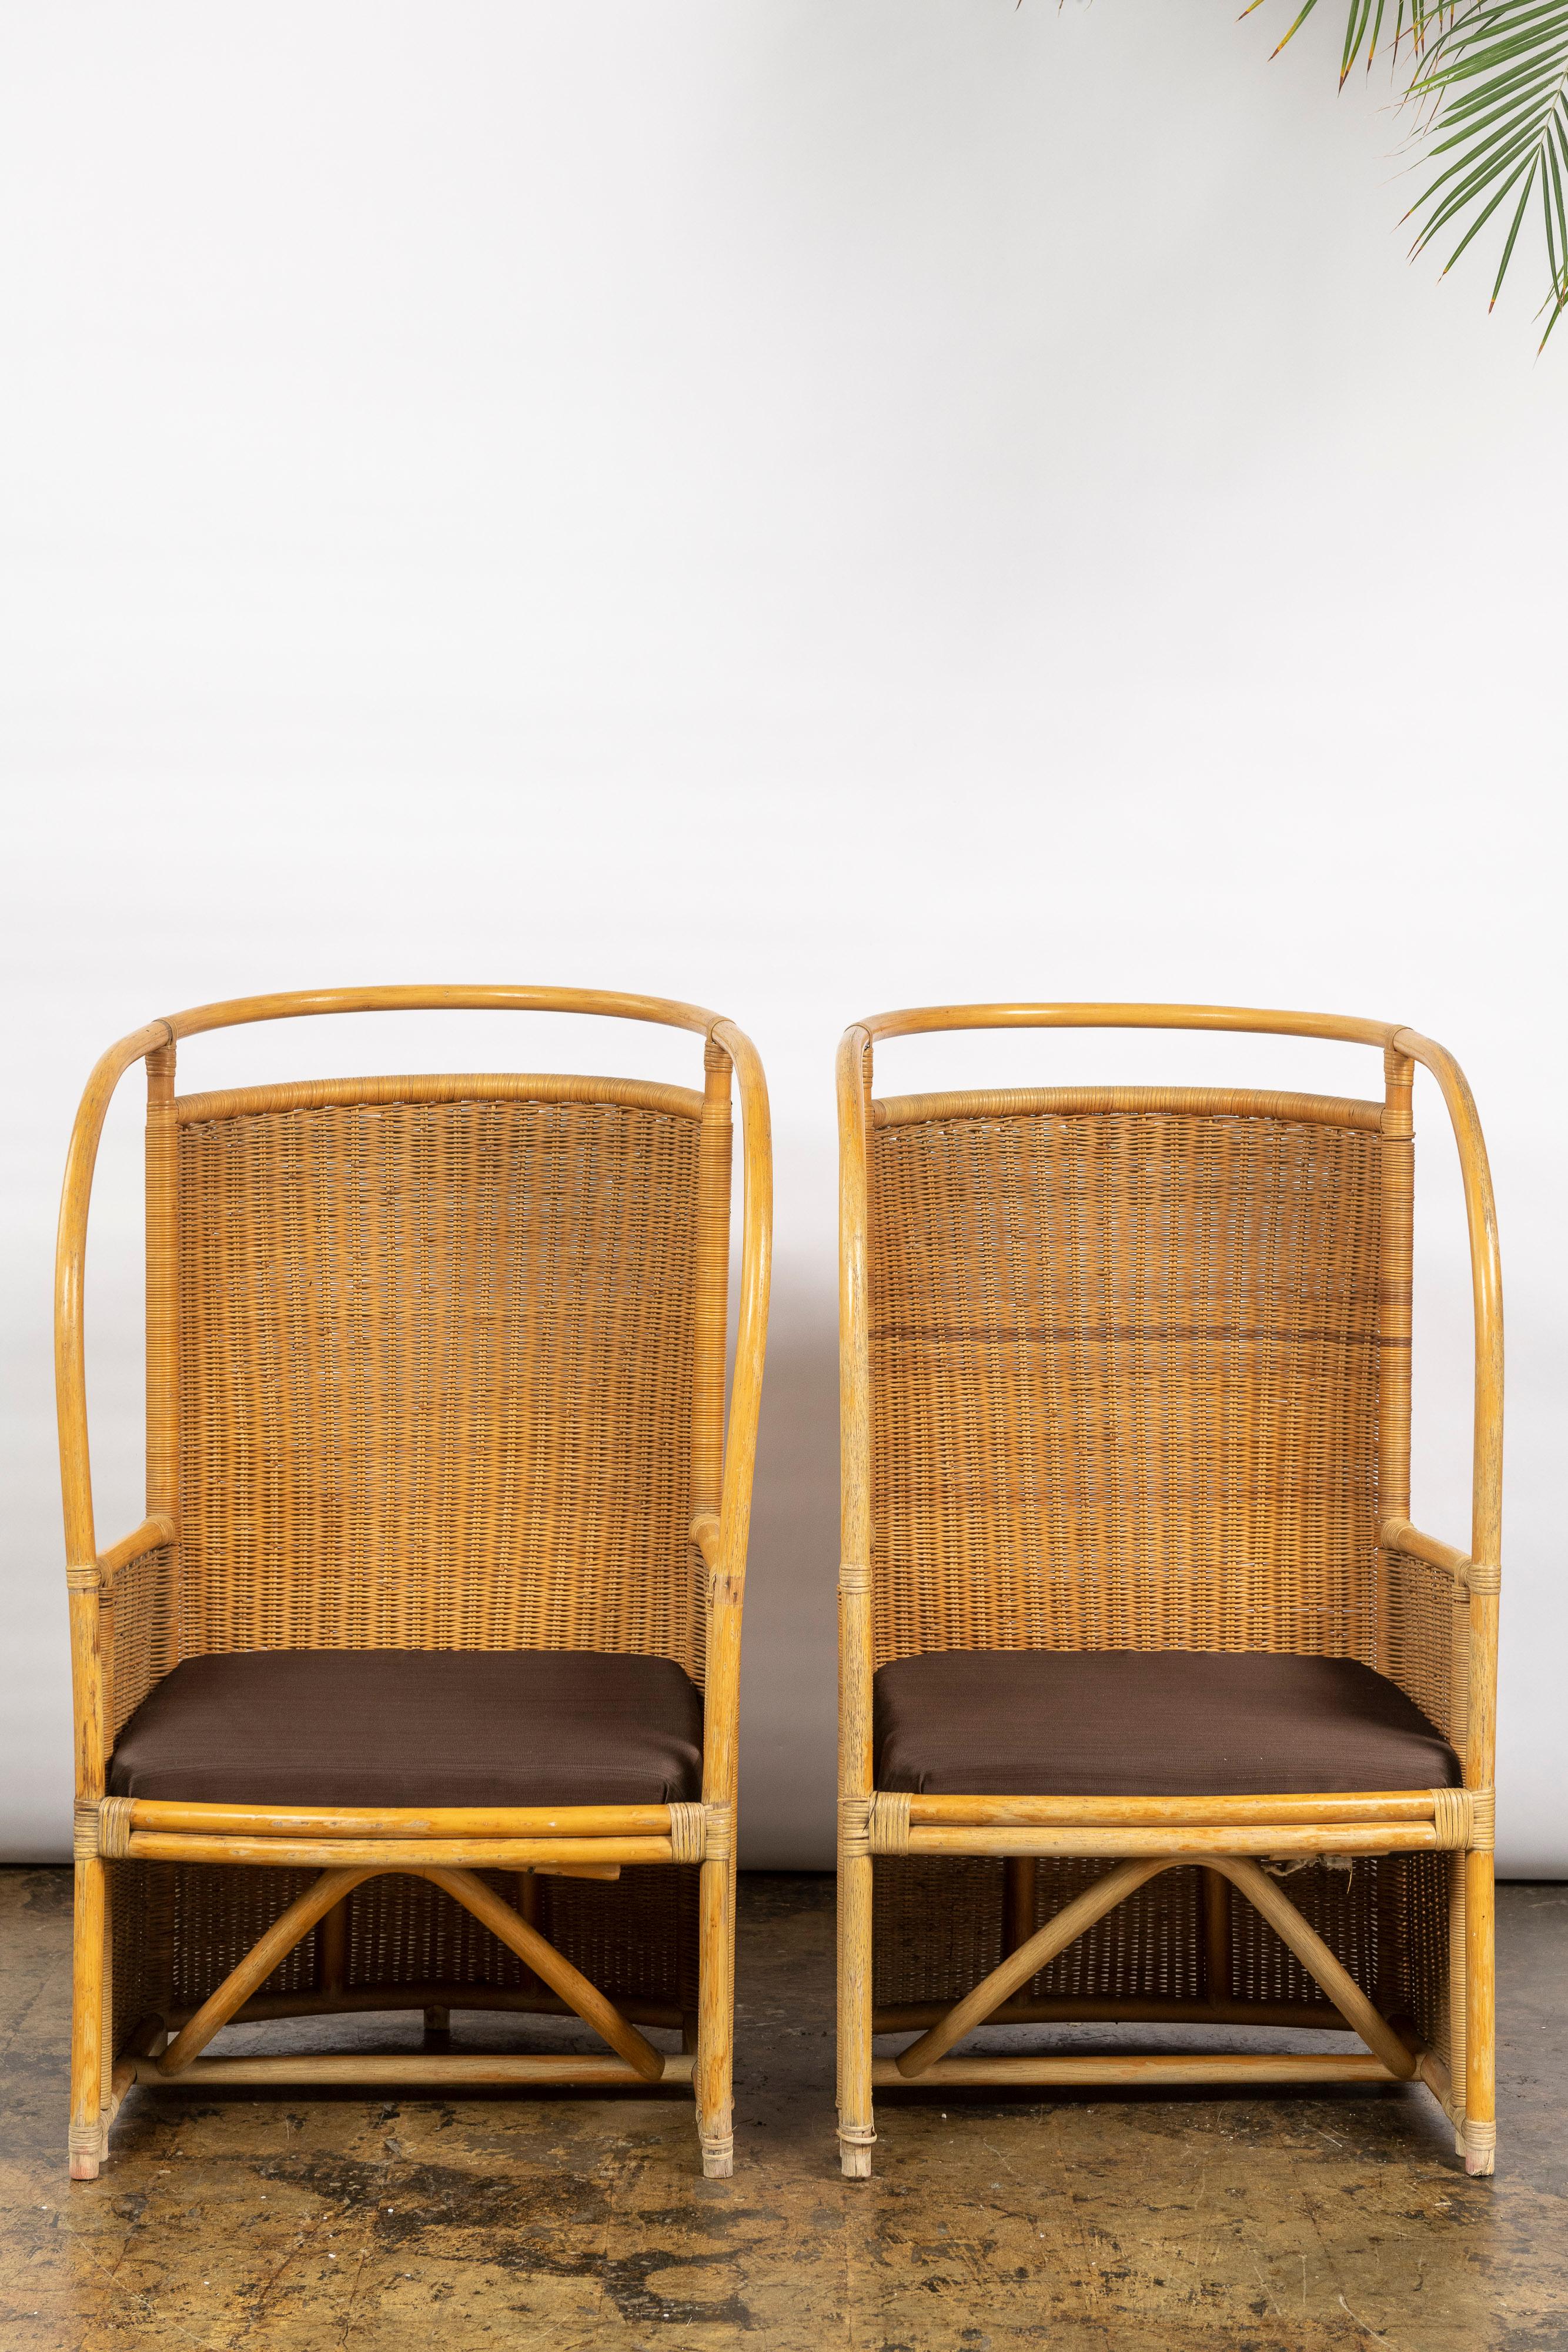 This is a wonderful pair of rattan and bamboo armchairs with a high back for placement on a porch, sunroom, or garden, made in Italy in the Mid-20th Century. Stylish and in very good condition.